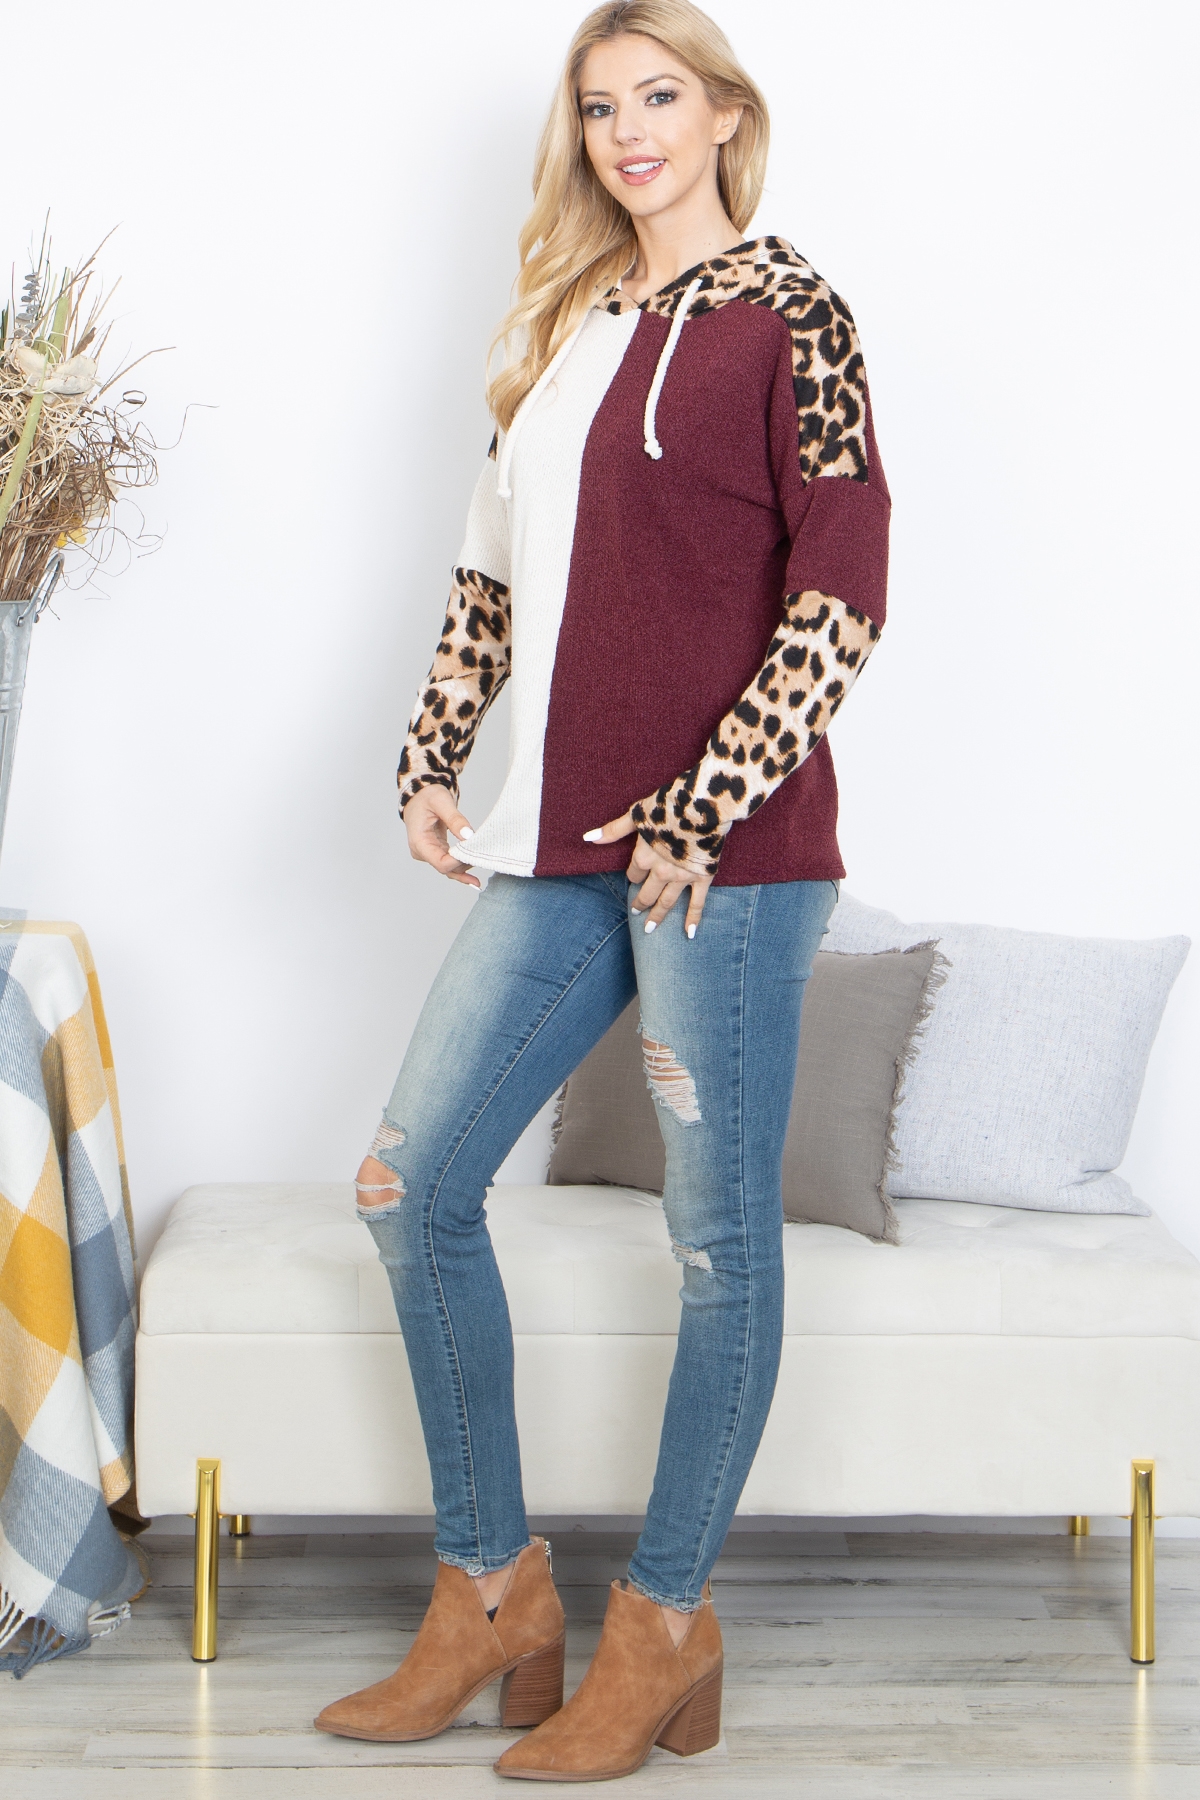 S14-12-1-PPT21144-BUIVTP - LEOPARD SLEEVES TWO TONED CONTRAST HOODIE- BURGUNDY-IVORY-TAUPE 1-2-2-2